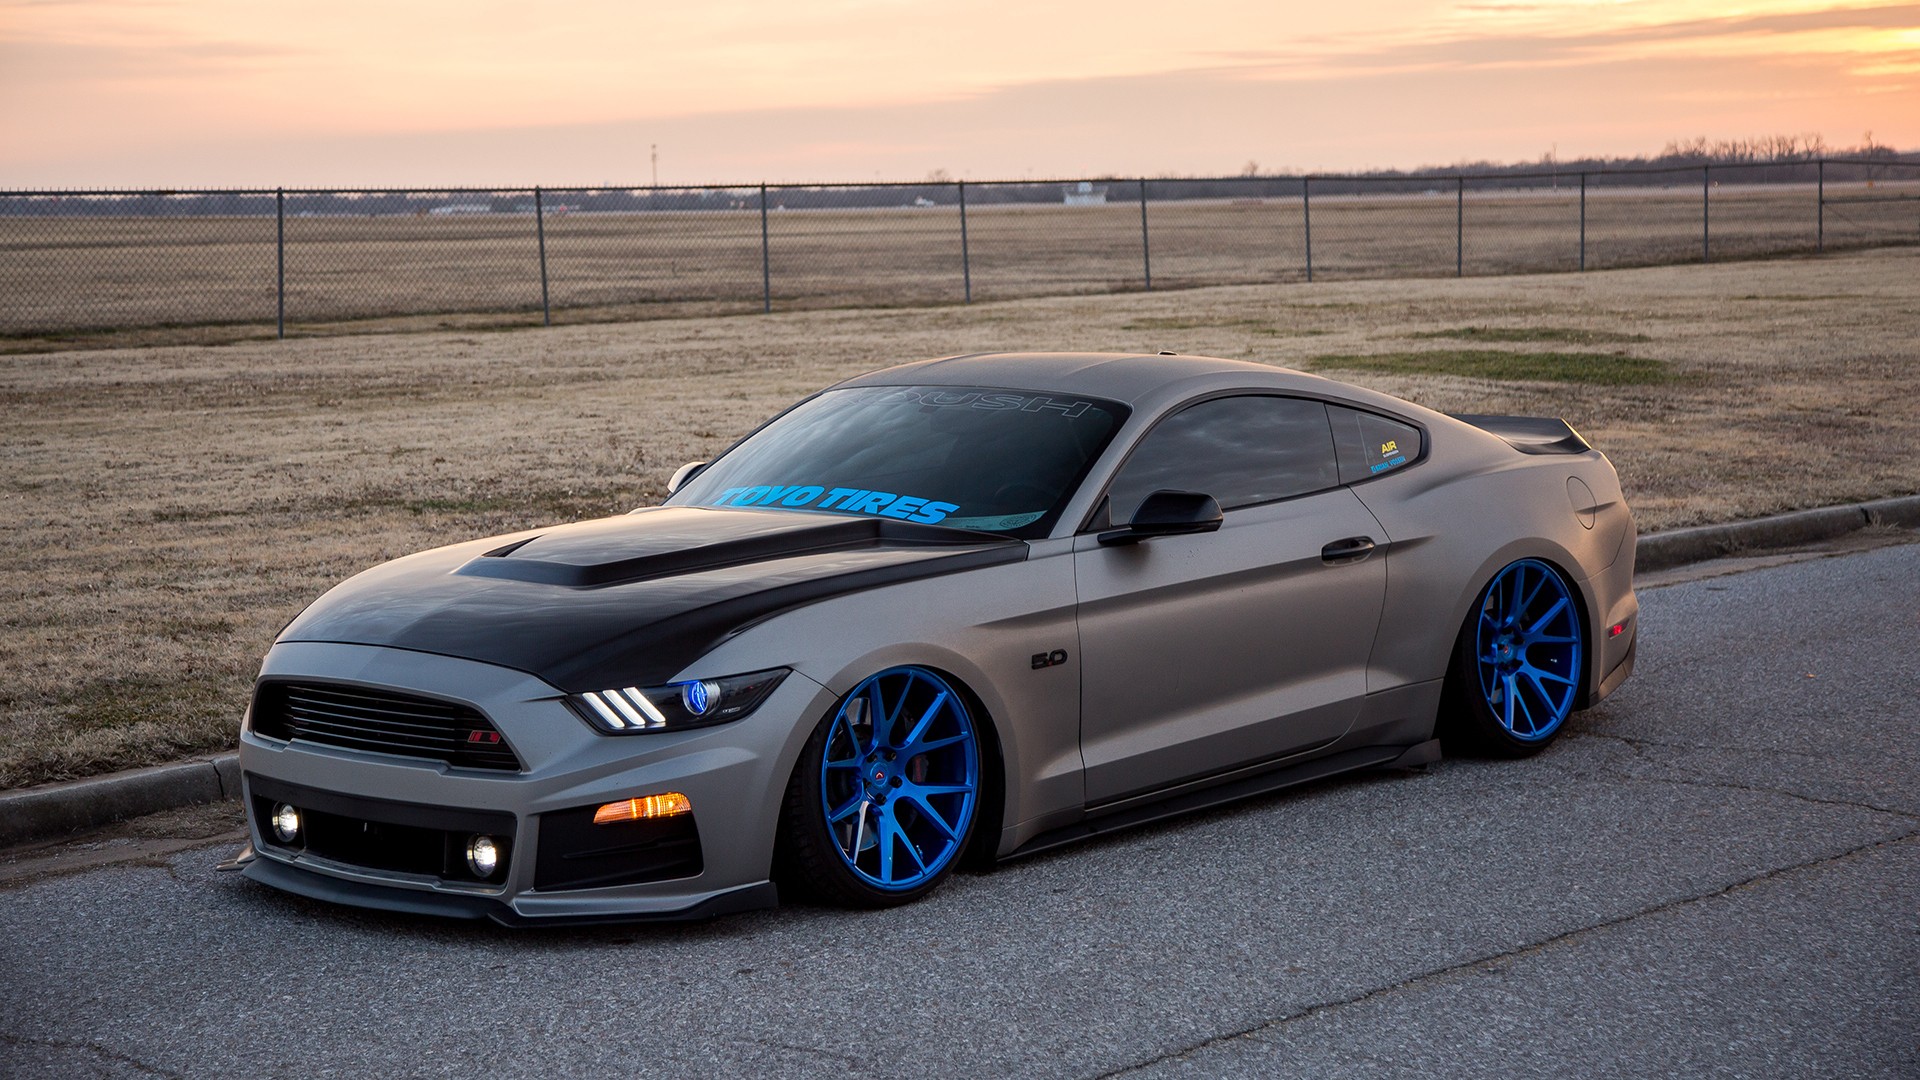 Ford, Ford Mustang, Rims, Stance, Air ride, Nature, Sky, Muscle cars, Tuning Wallpaper